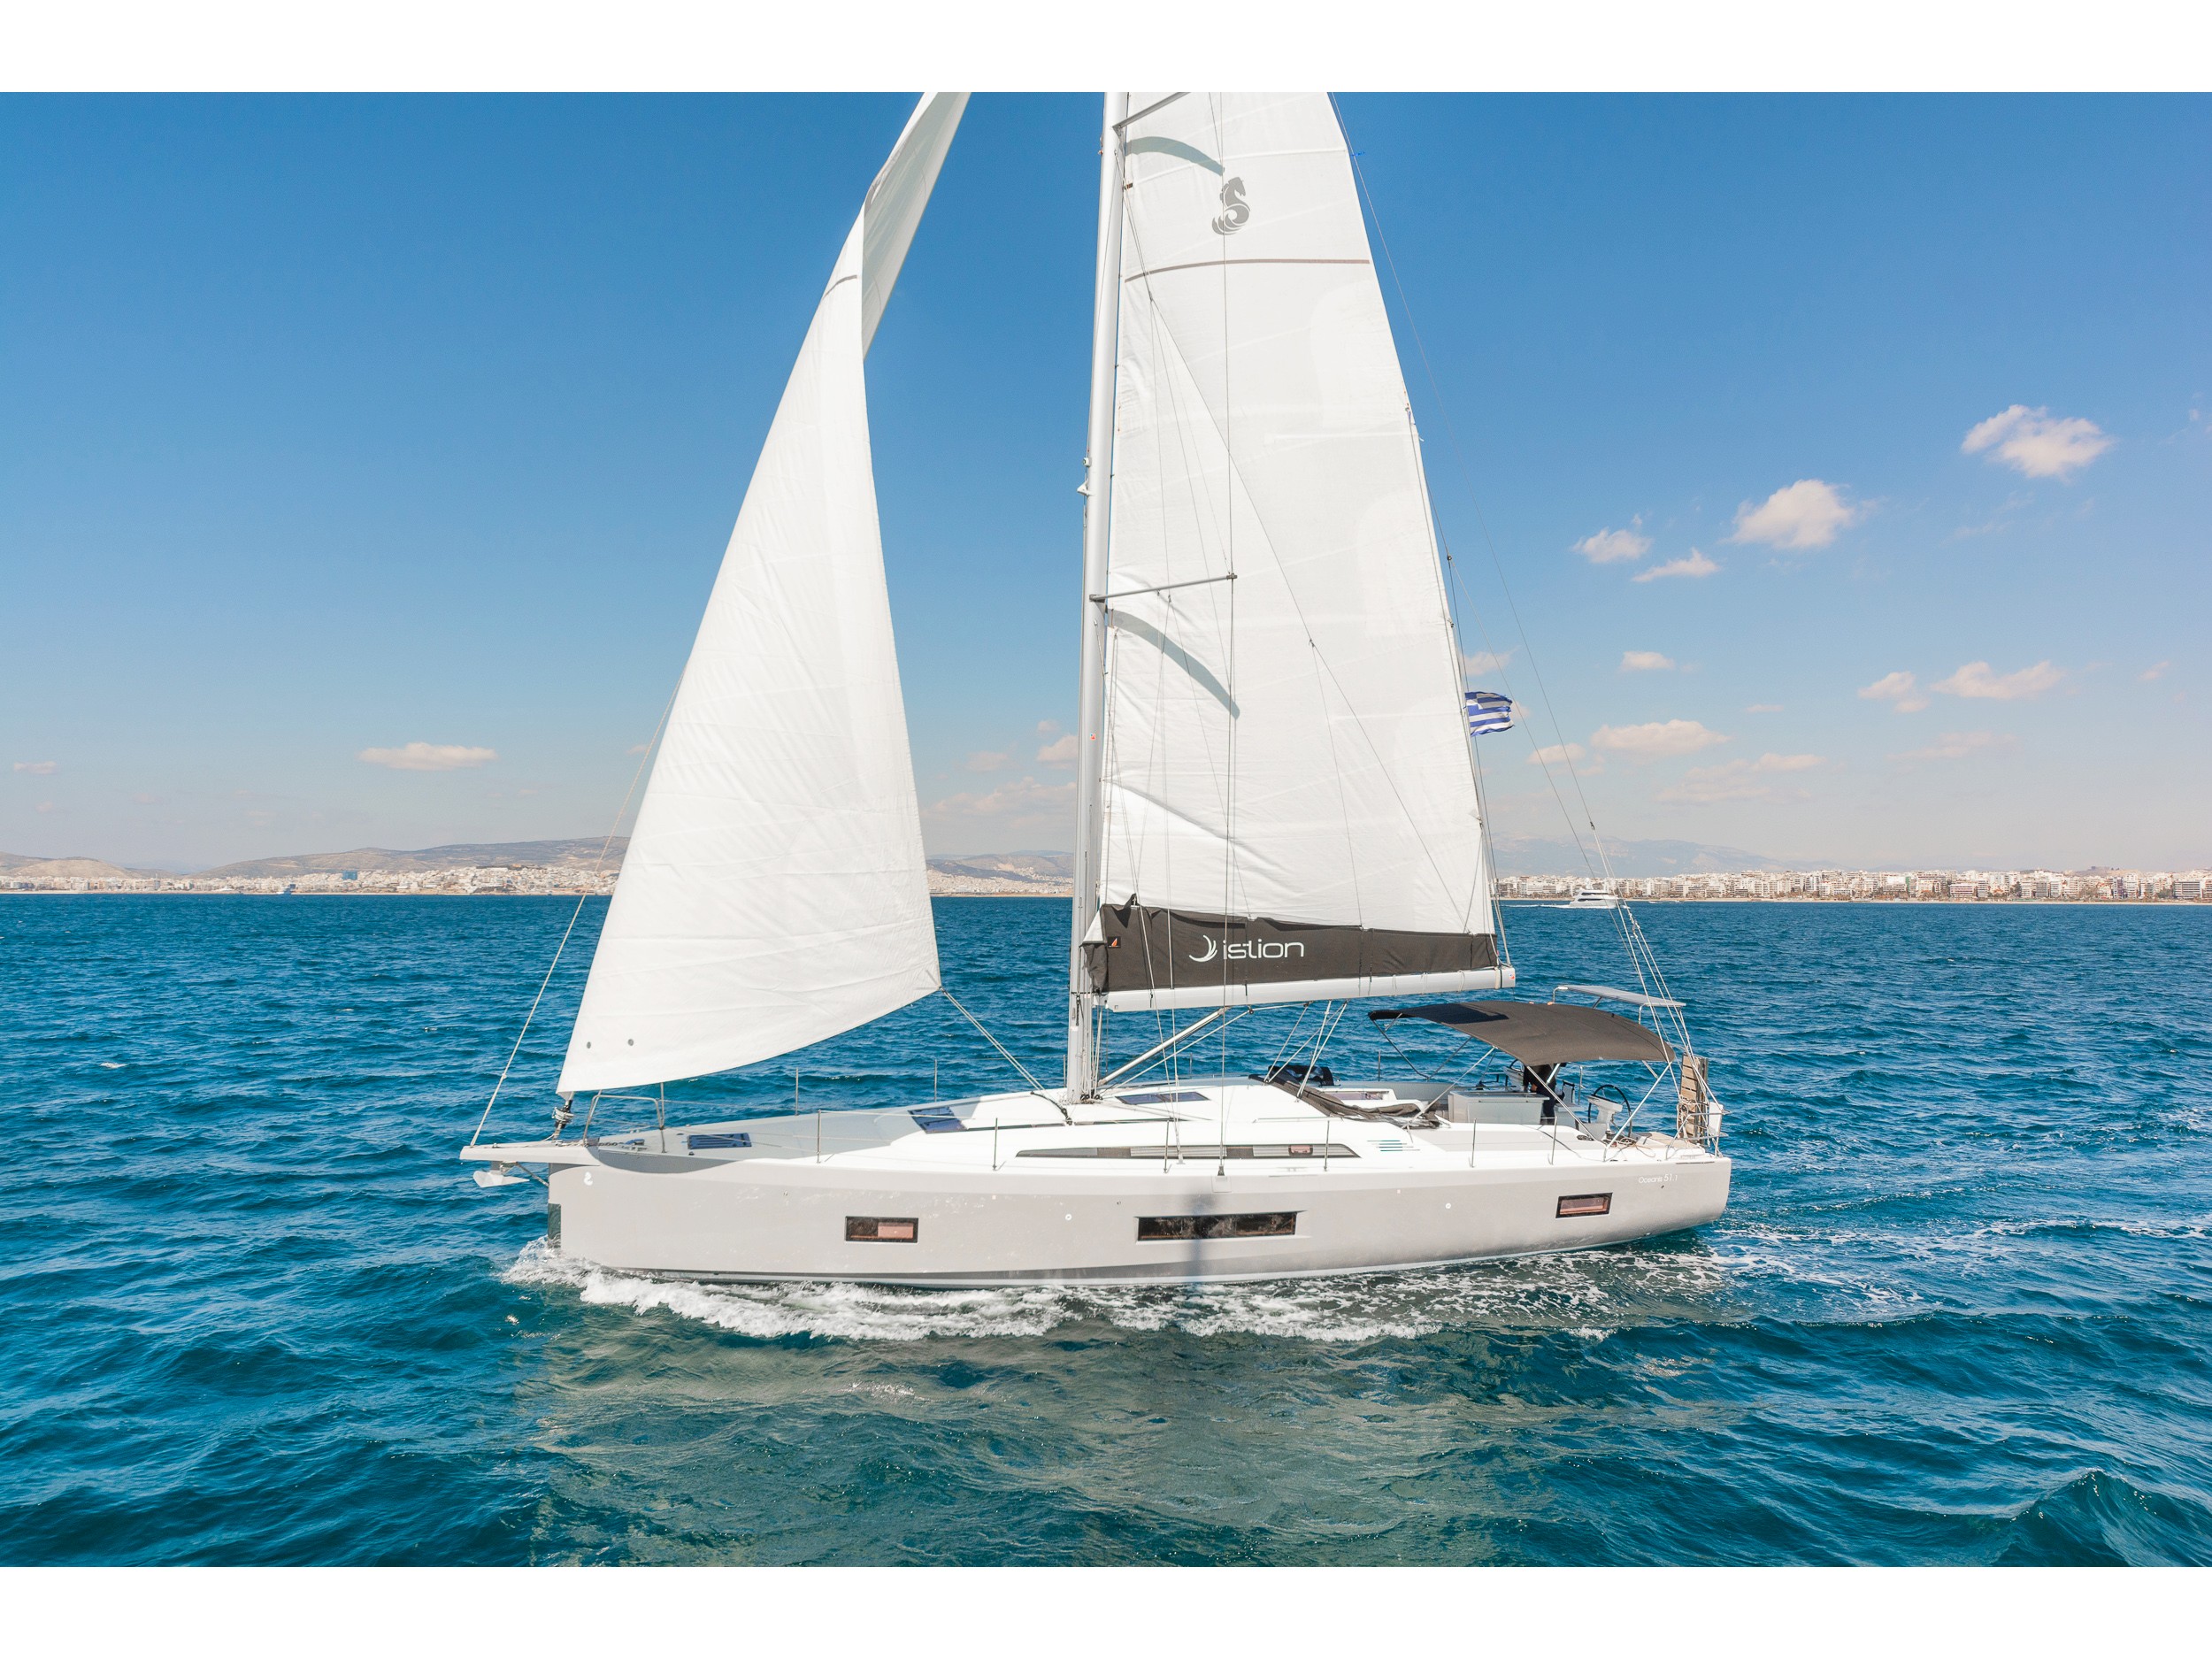 Oceanis 51.1 - Sailboat Charter Worldwide & Boat hire in Greece Dodecanese Rhodes Rhodes Marina 2